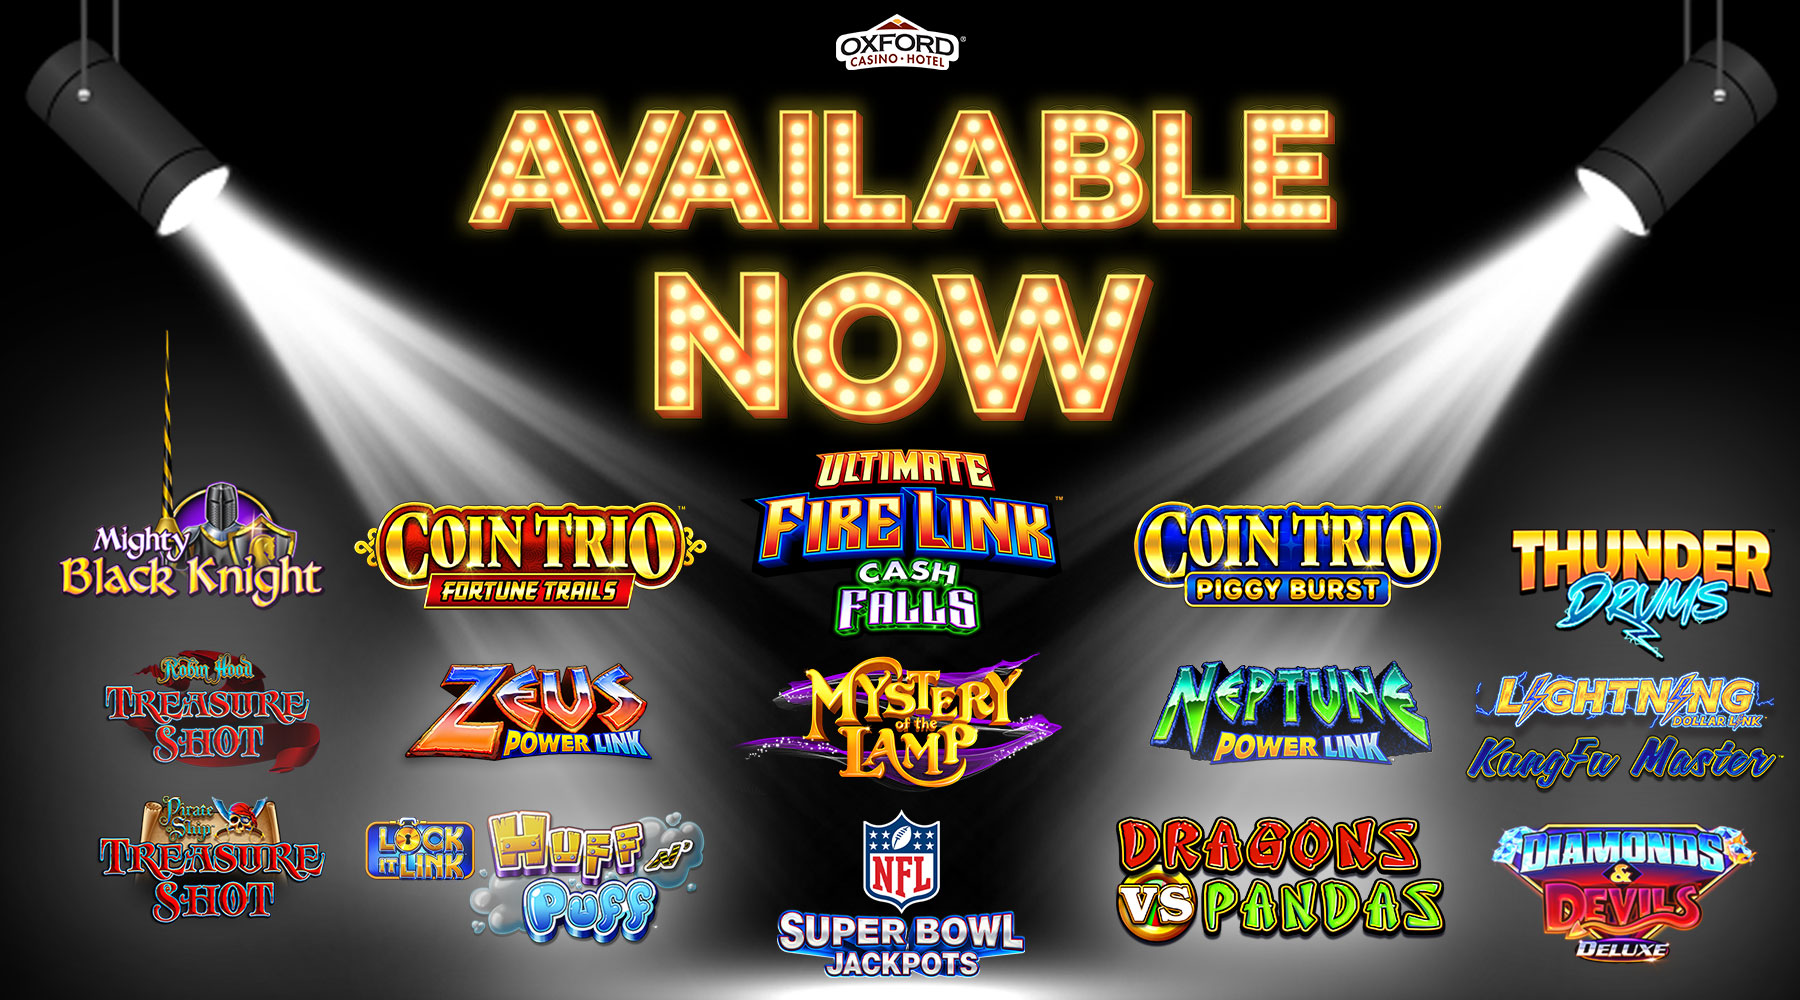 New Slot Machine games available now at Oxford Casino Hotel